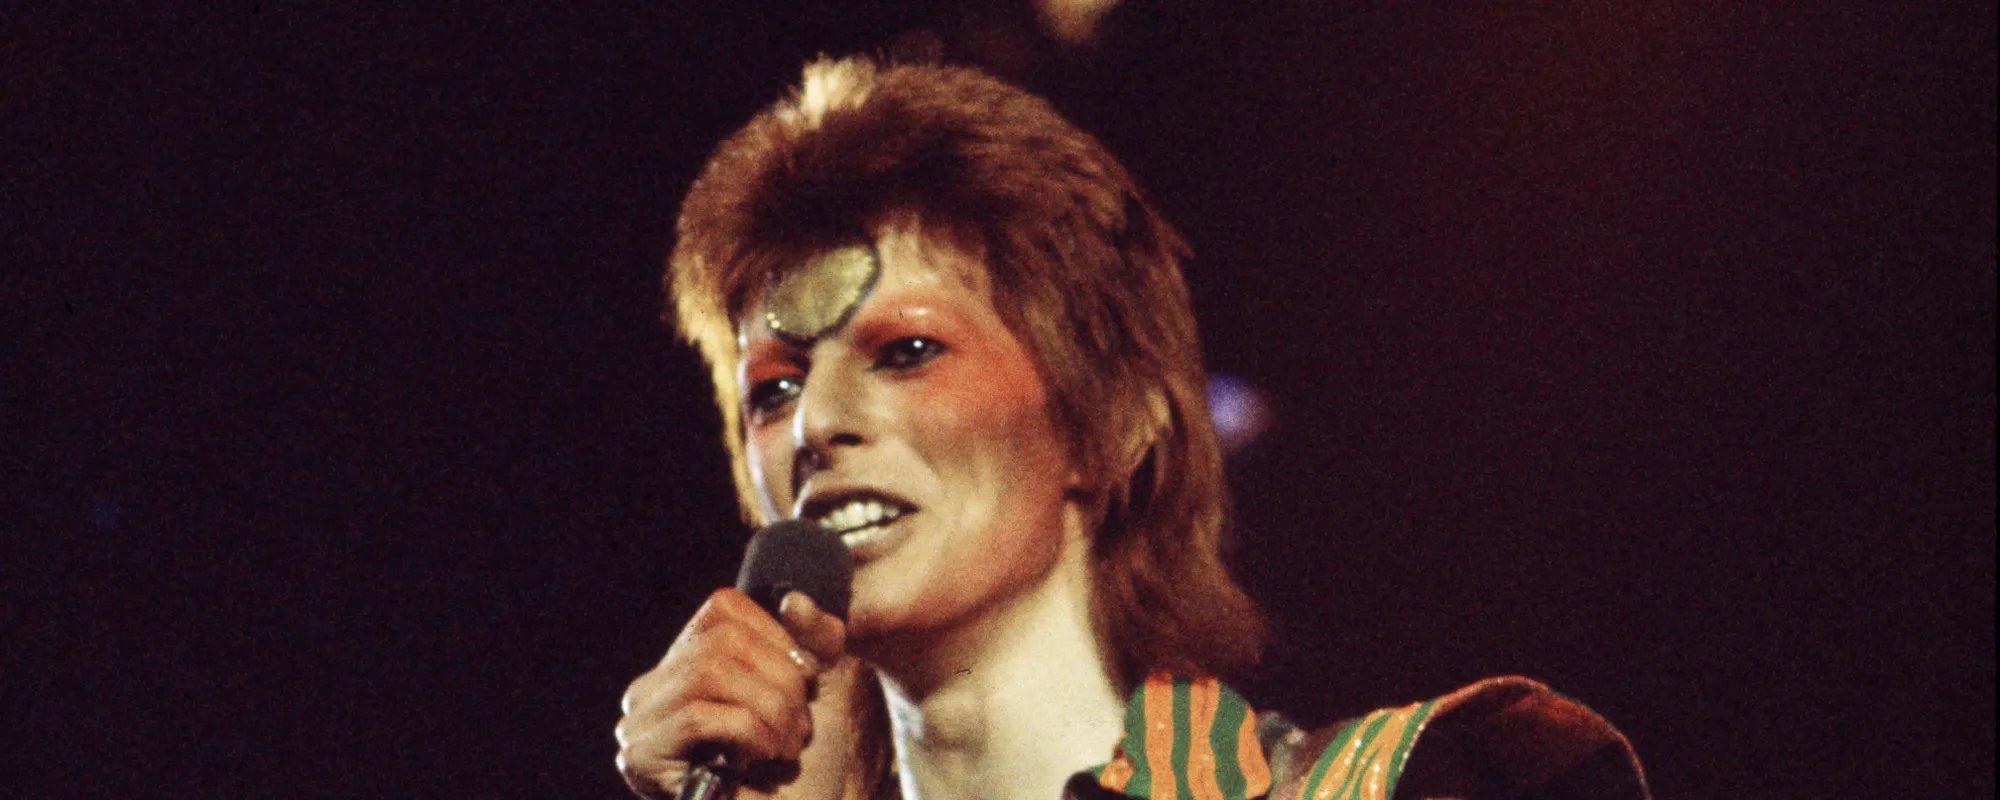 Watch: Upcoming David Bowie Documentary Drops New Trailer